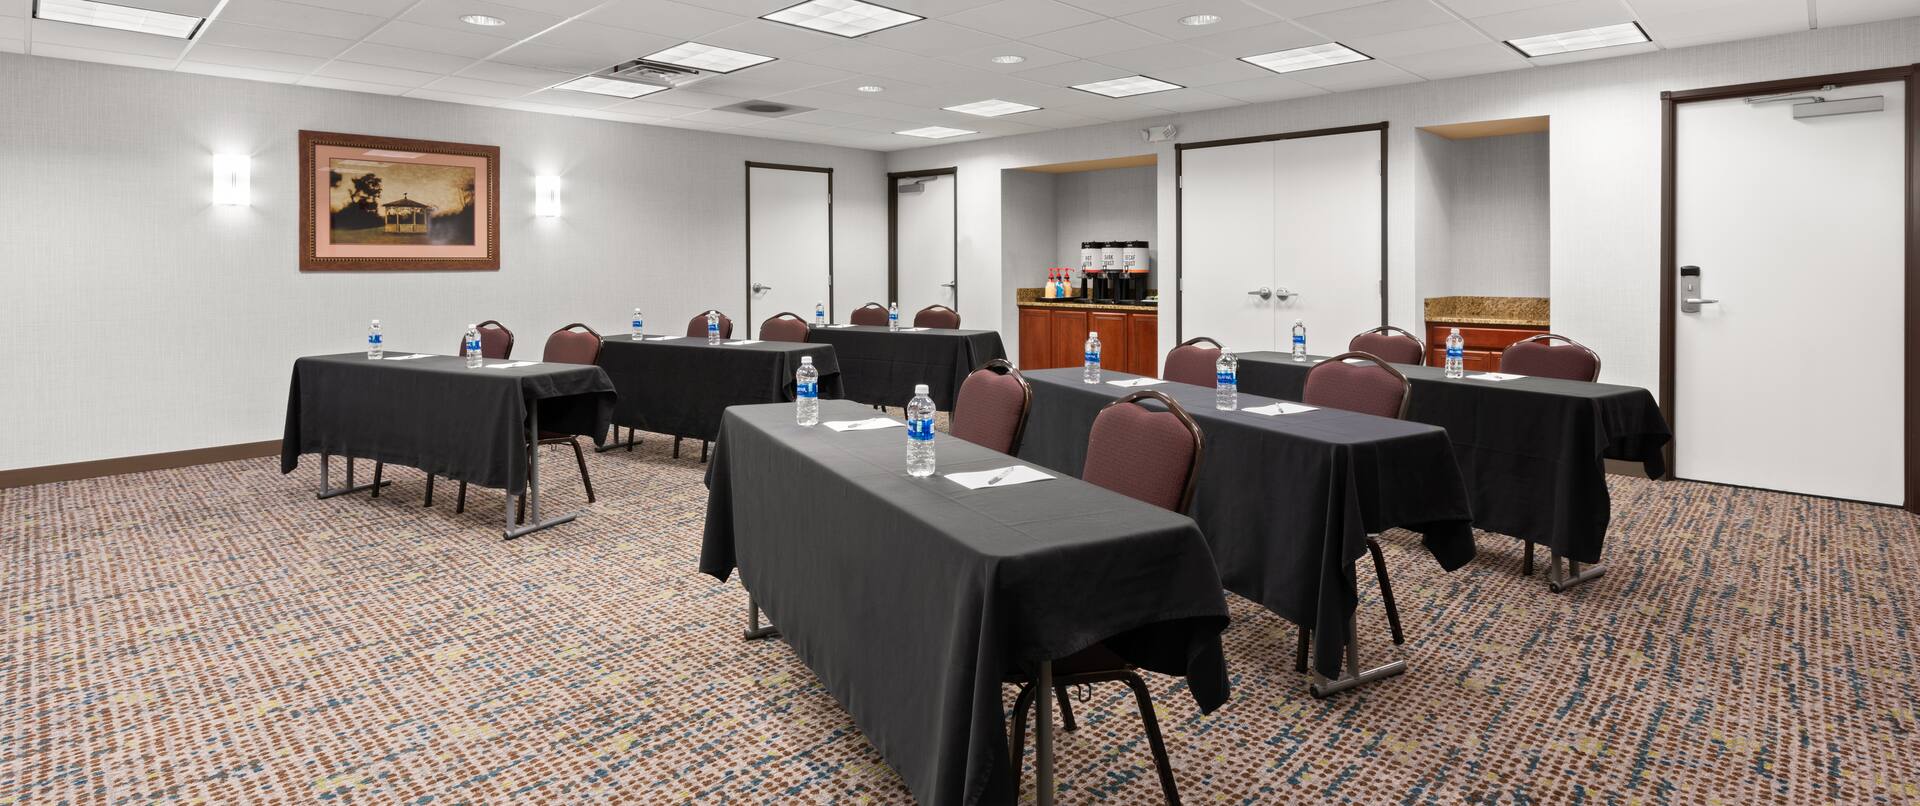 Large meeting room available with multiple set ups